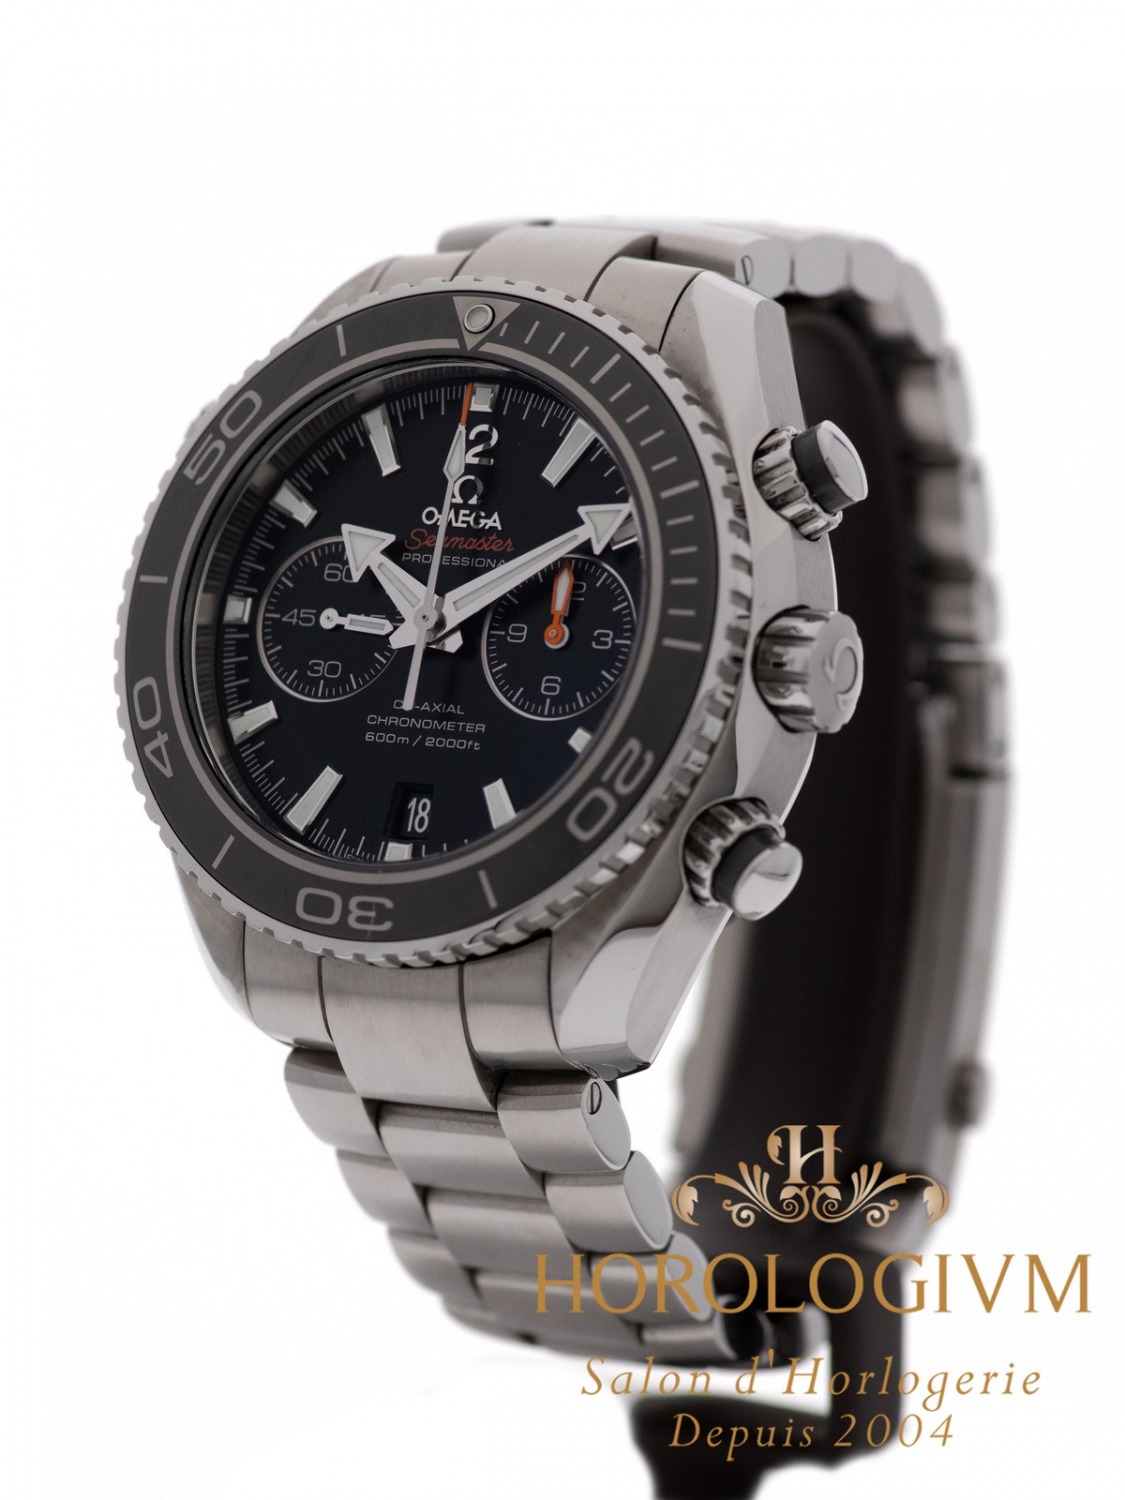 Omega Seamaster Planet Ocean Co-Axial Chronograph 600M watch, silver (case) and grey-black (bezel)